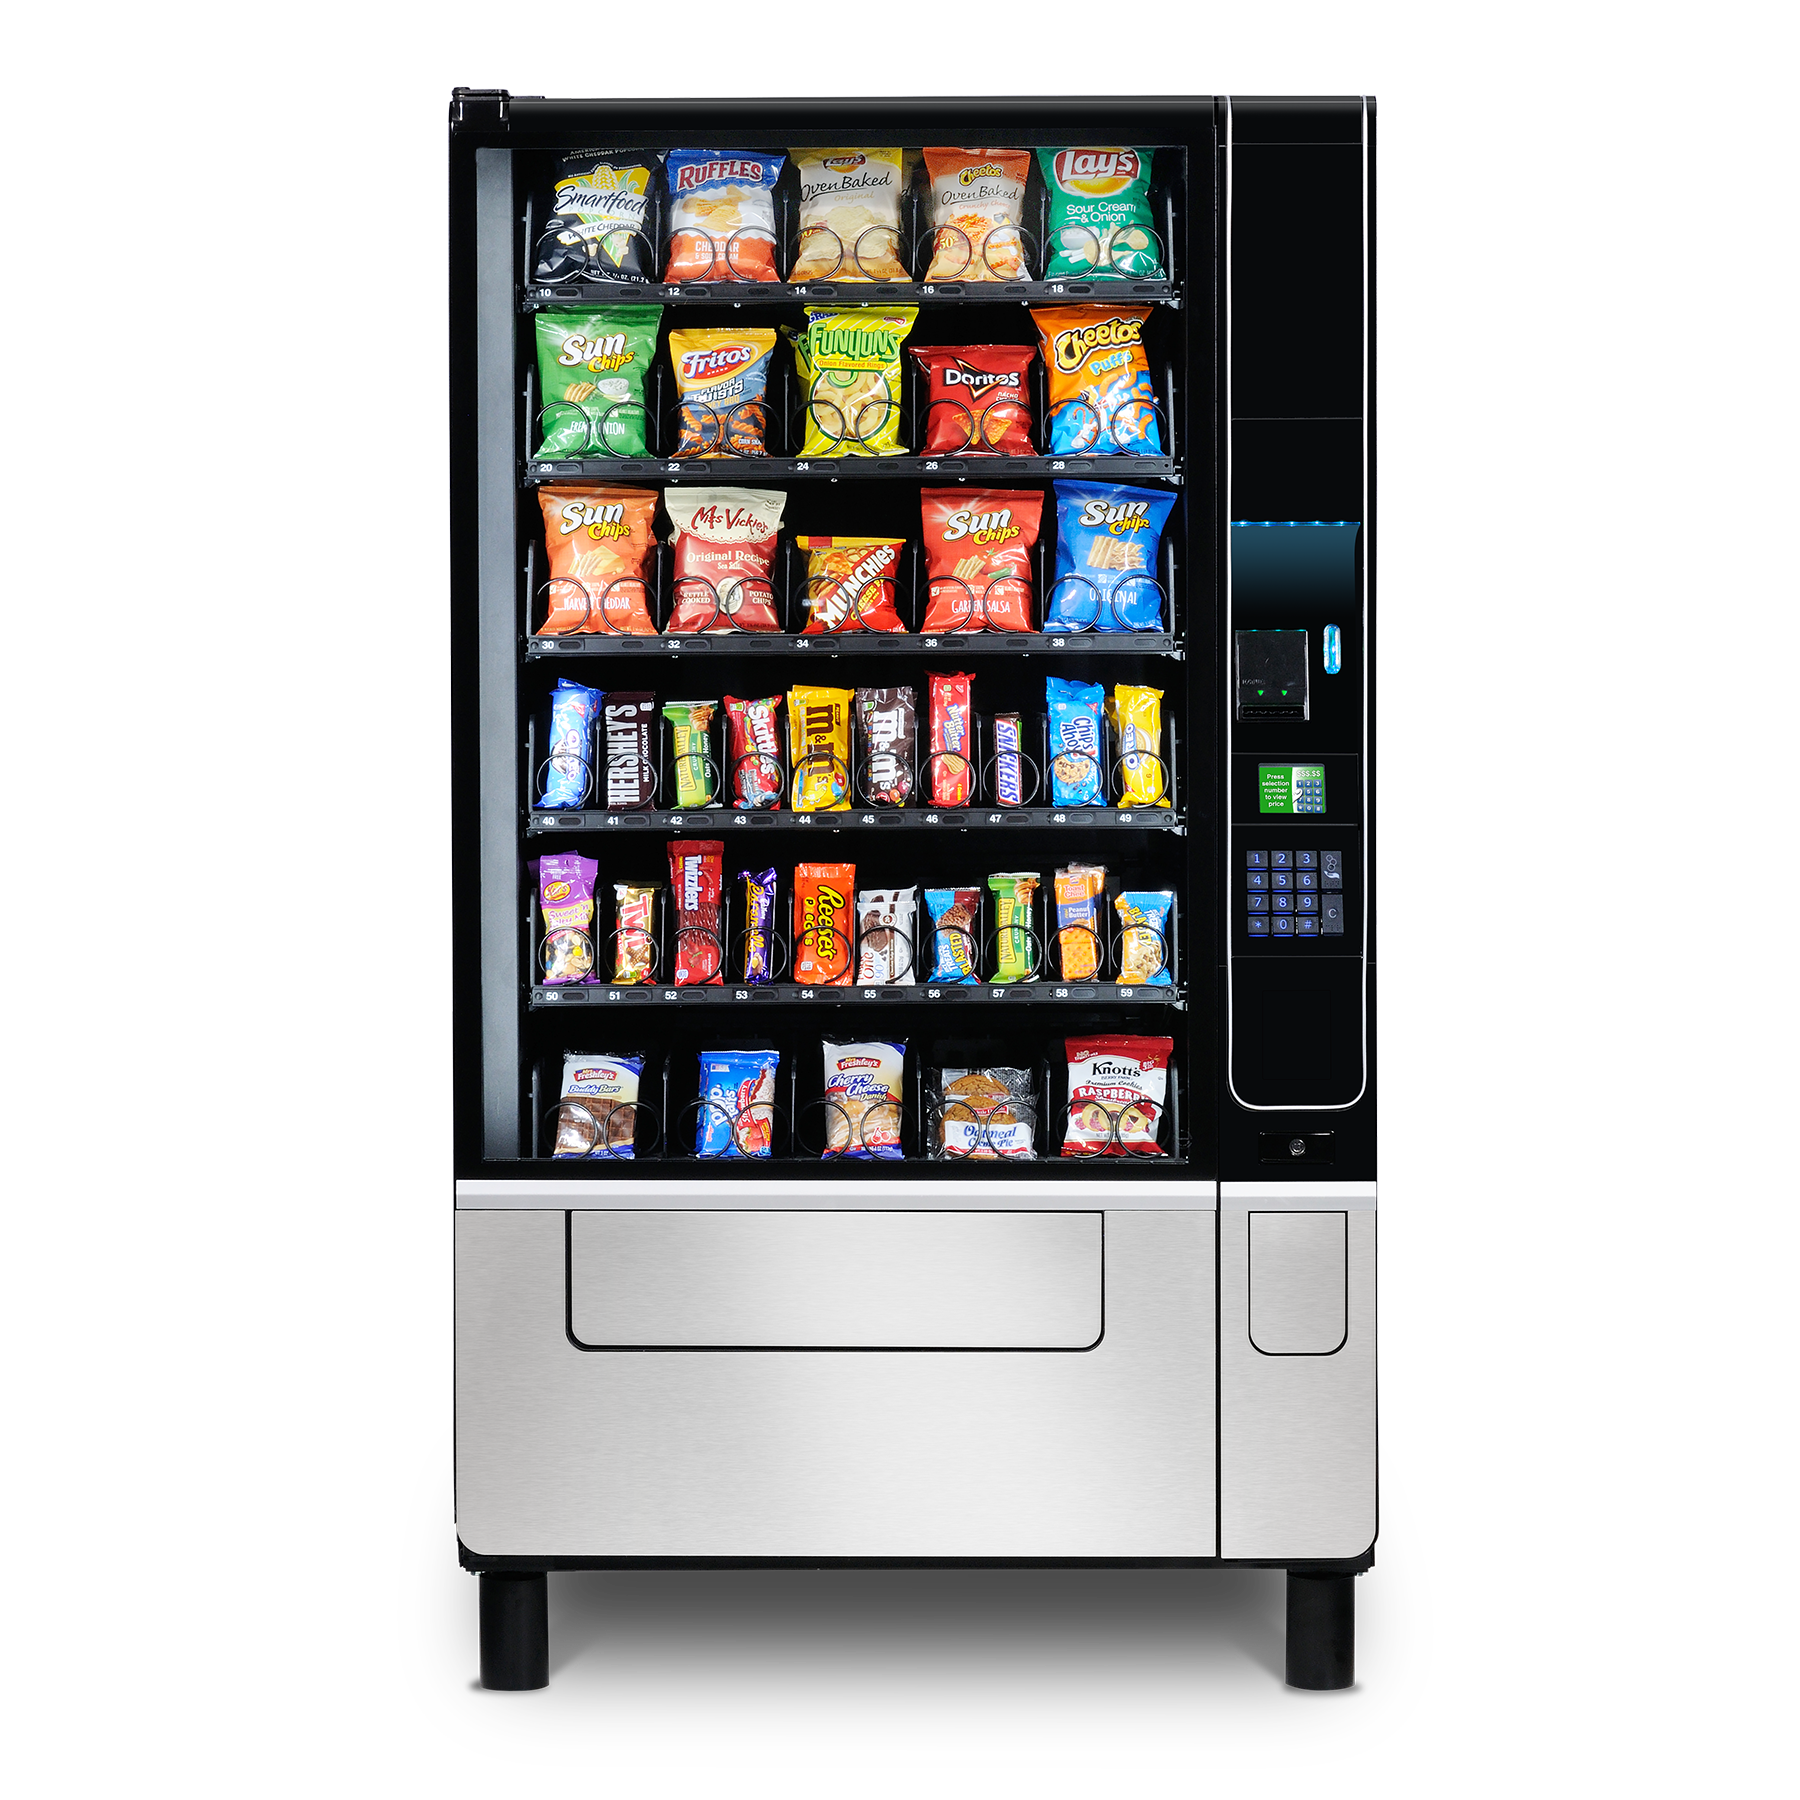 The Evolution 40 Snack Vending Machine from Selectivend filled with the most popular snacks.